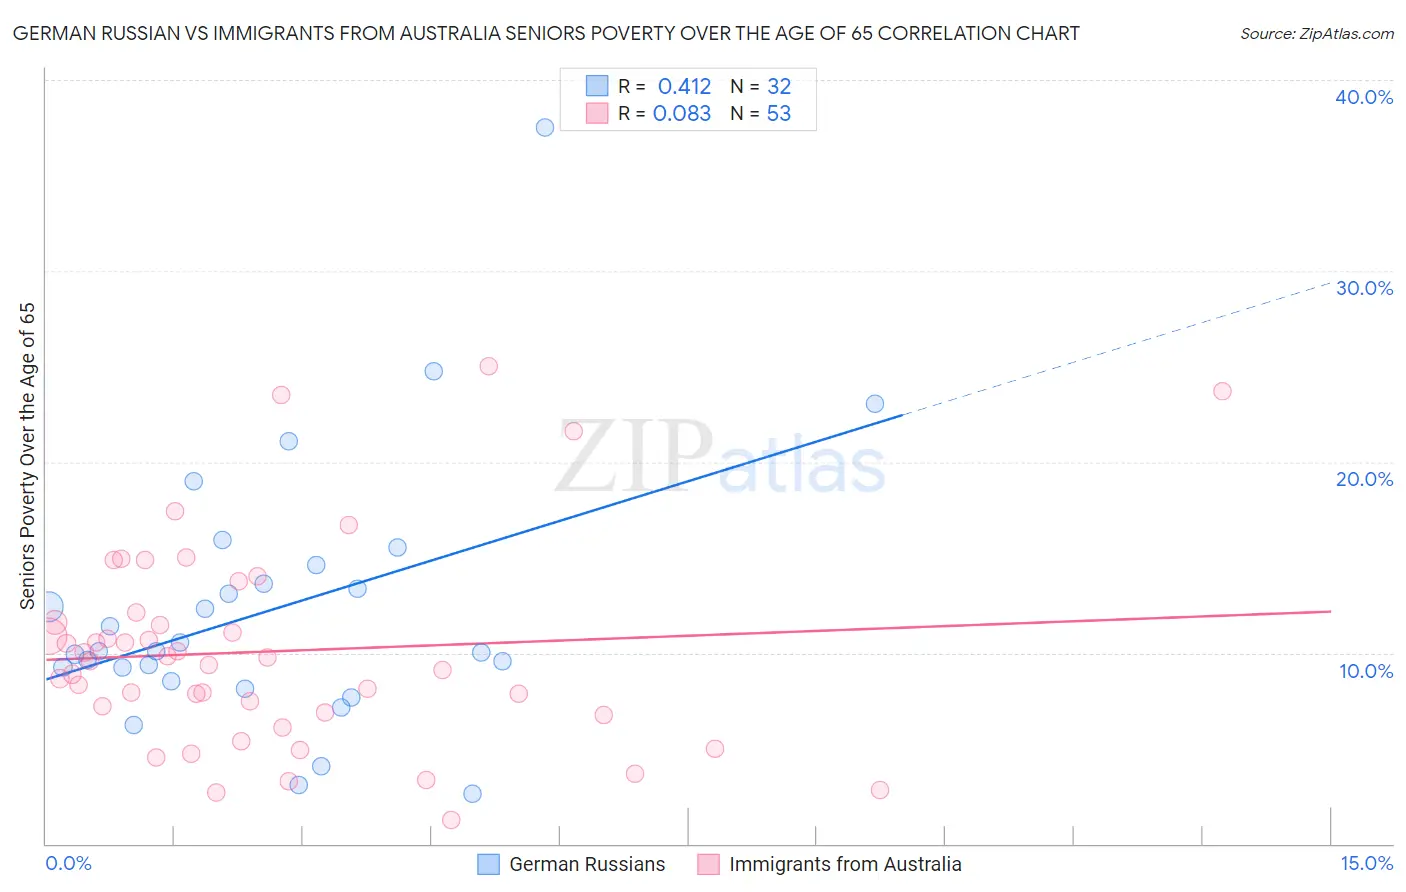 German Russian vs Immigrants from Australia Seniors Poverty Over the Age of 65